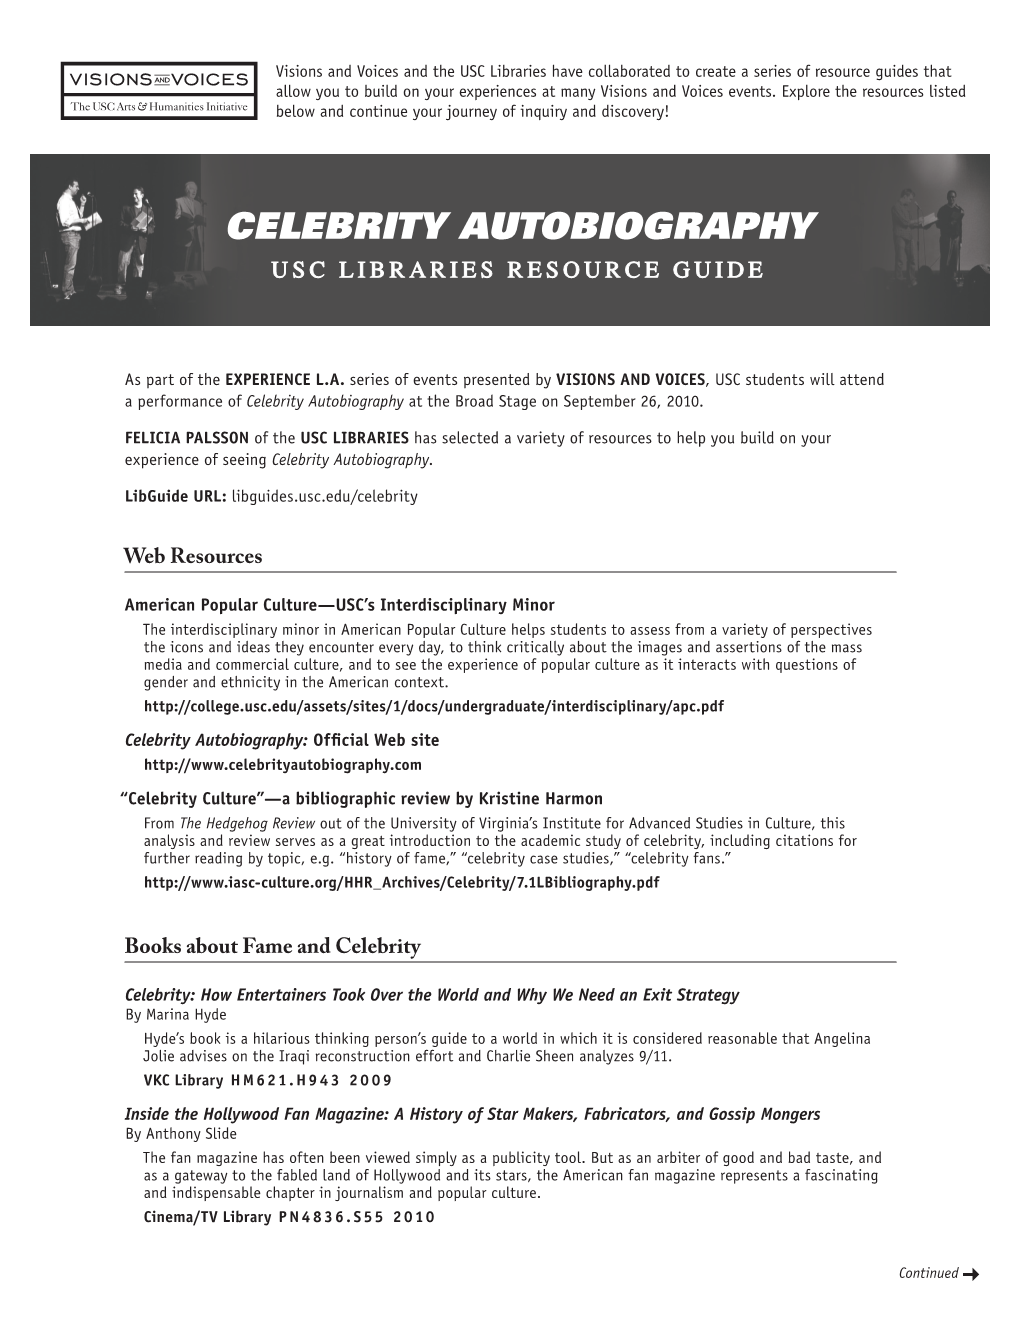 Celebrity Autobiography Usc Libraries Resource Guide